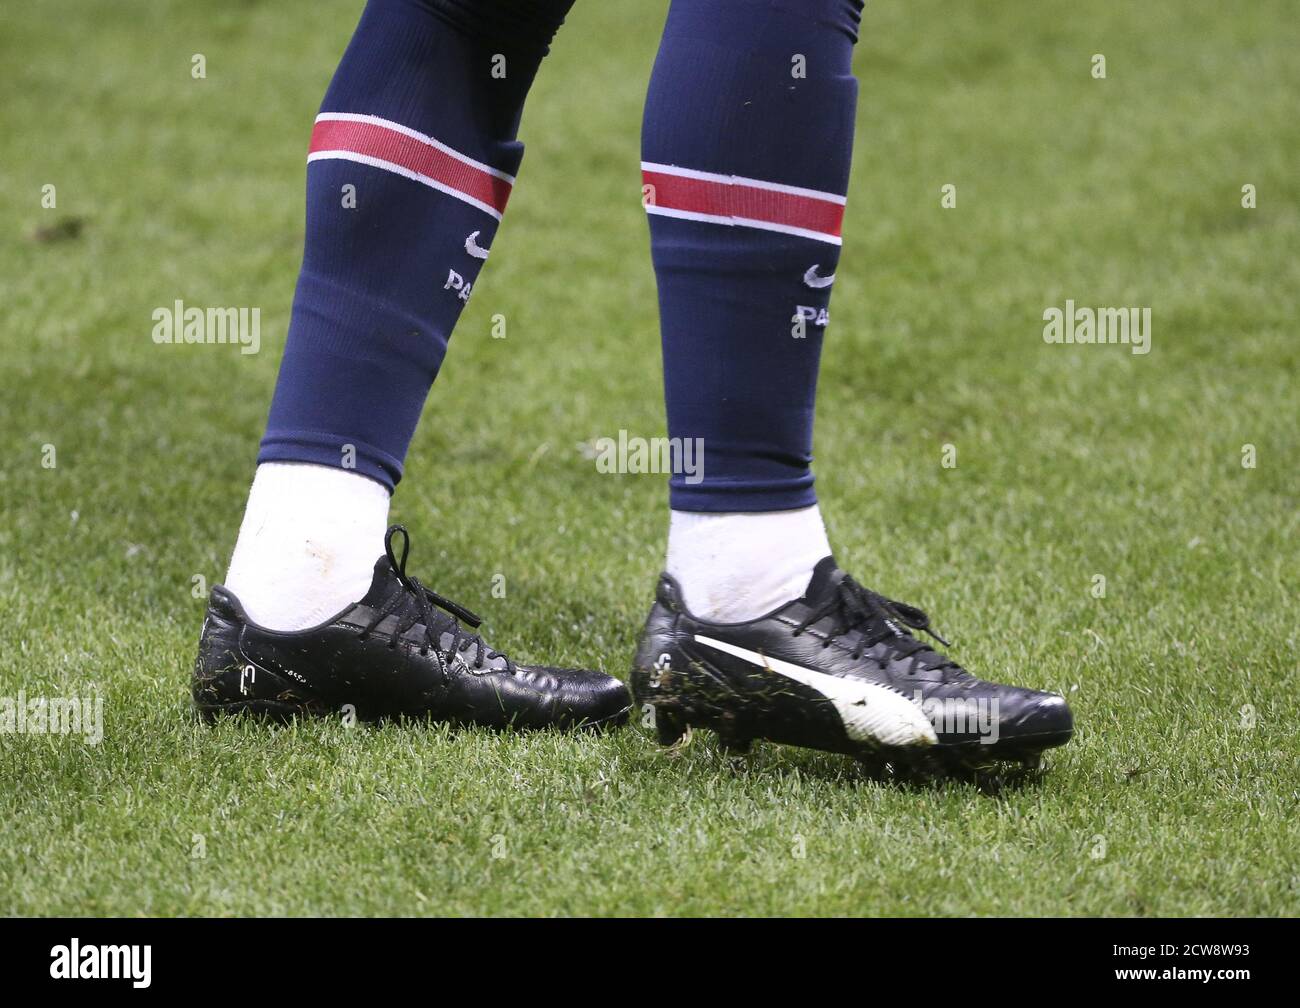 Neymar Jr of PSG wearing his new Puma shoes during the French championship  Ligue 1 football match between Stade de Reims and Paris Saint-Germain on Se  Stock Photo - Alamy